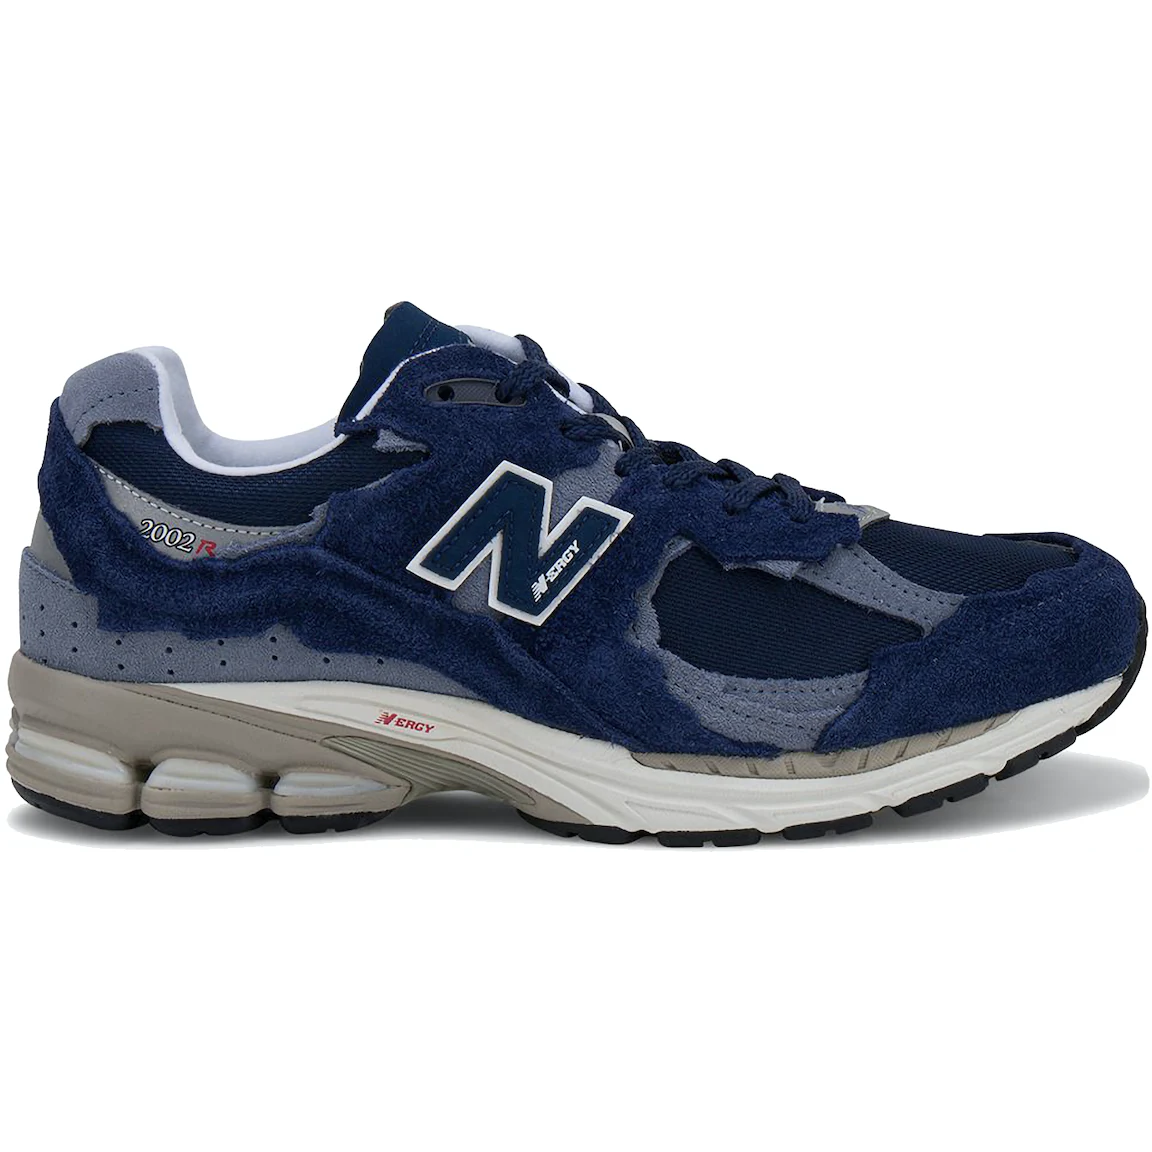 New Balance 2002R Protection Pack Navy Grey by New Balance from £185.00